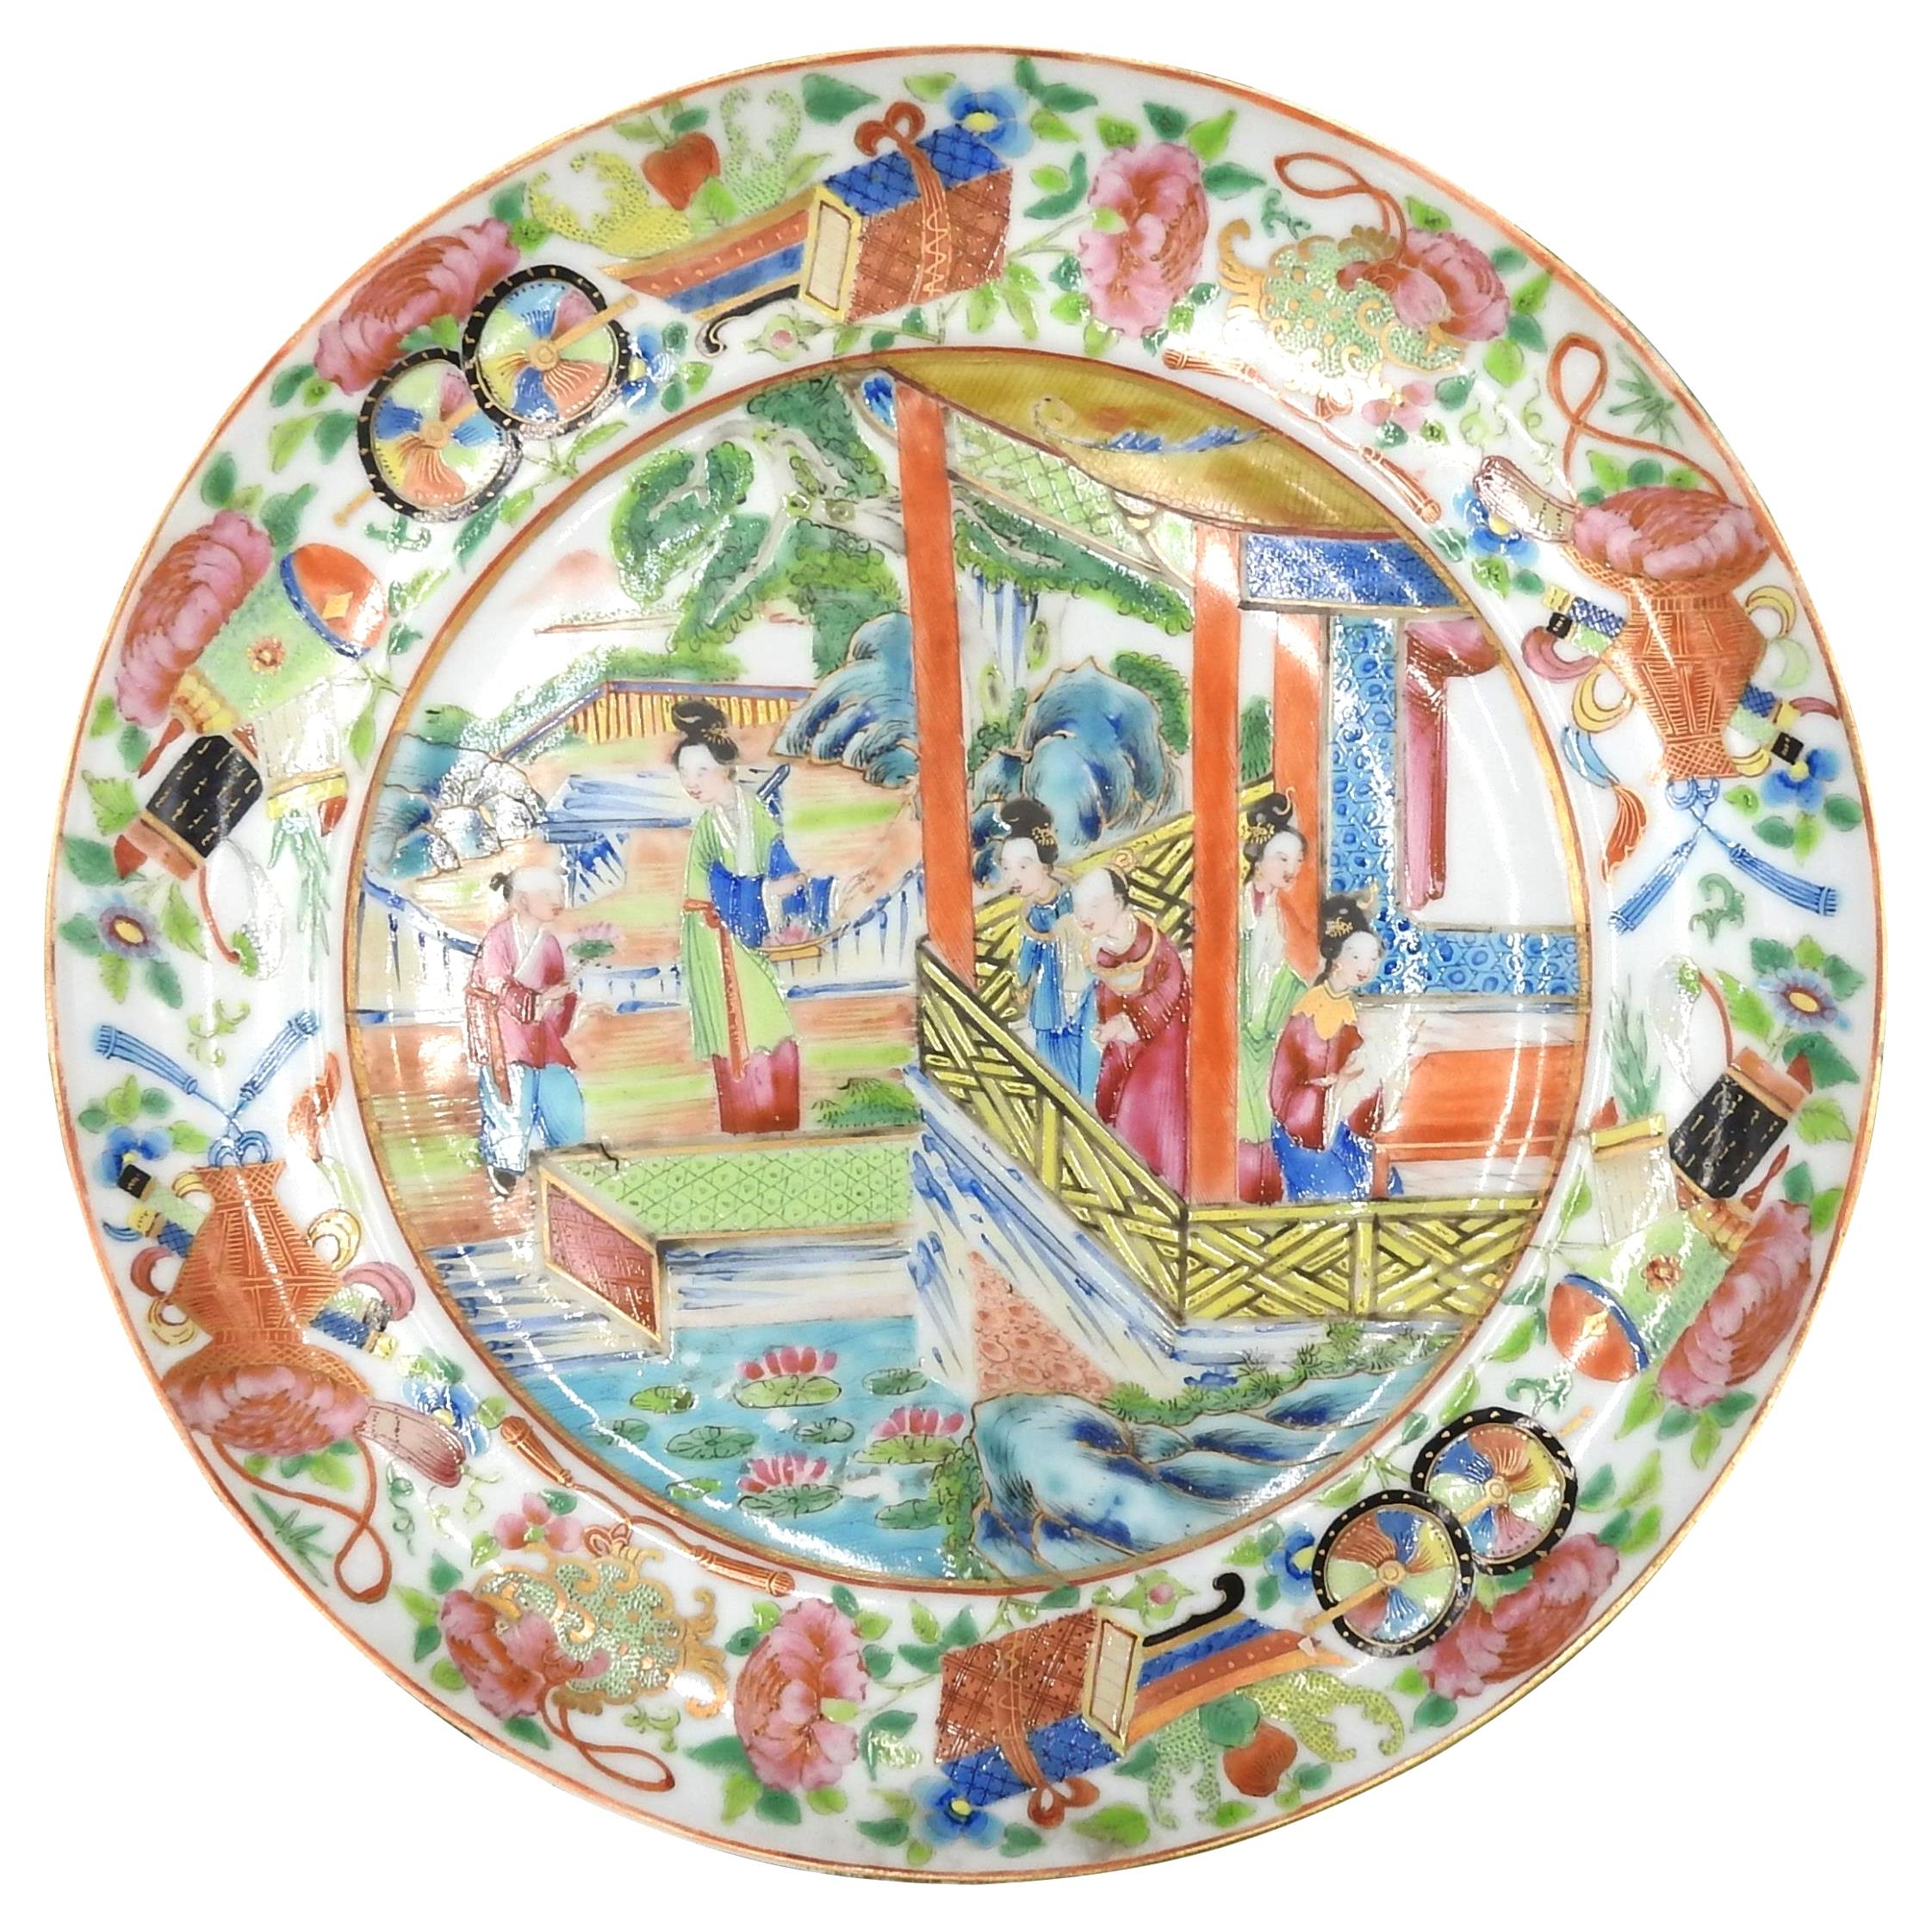 A GOOD CHINESE FAMILLE ROSE DISH, QING DYNASTY, 19TH CENTURY, painted with elegant ladies and